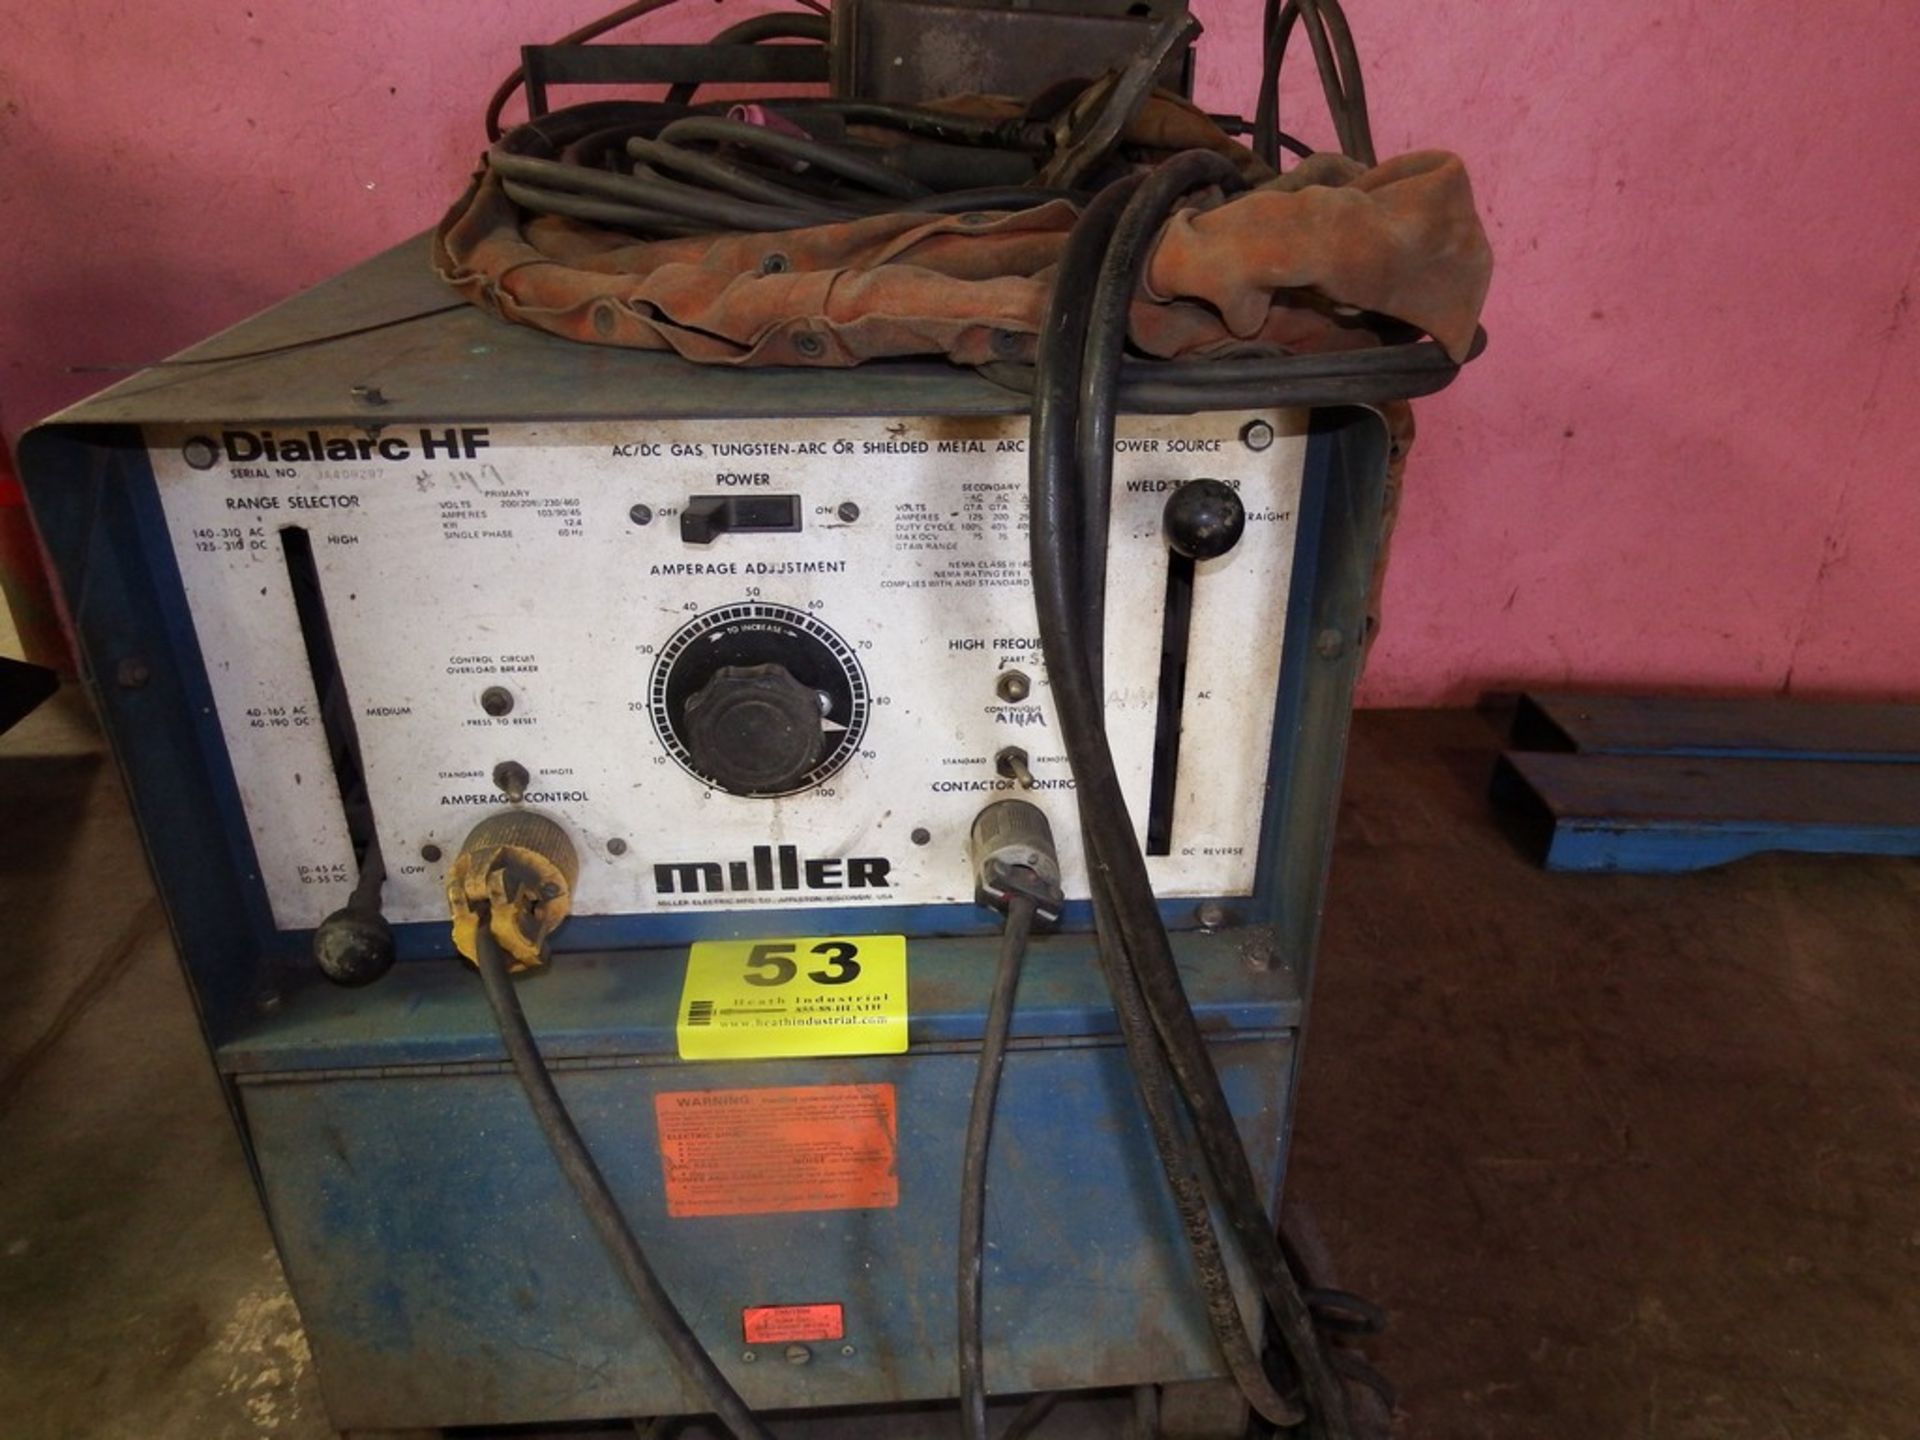 MILLER MODEL DIALARC HF 250 AMP AC/DC GAS TUNGSTEN ARC POWER SOURCE WITH FOOT PEDAL CONTROL - Image 2 of 3